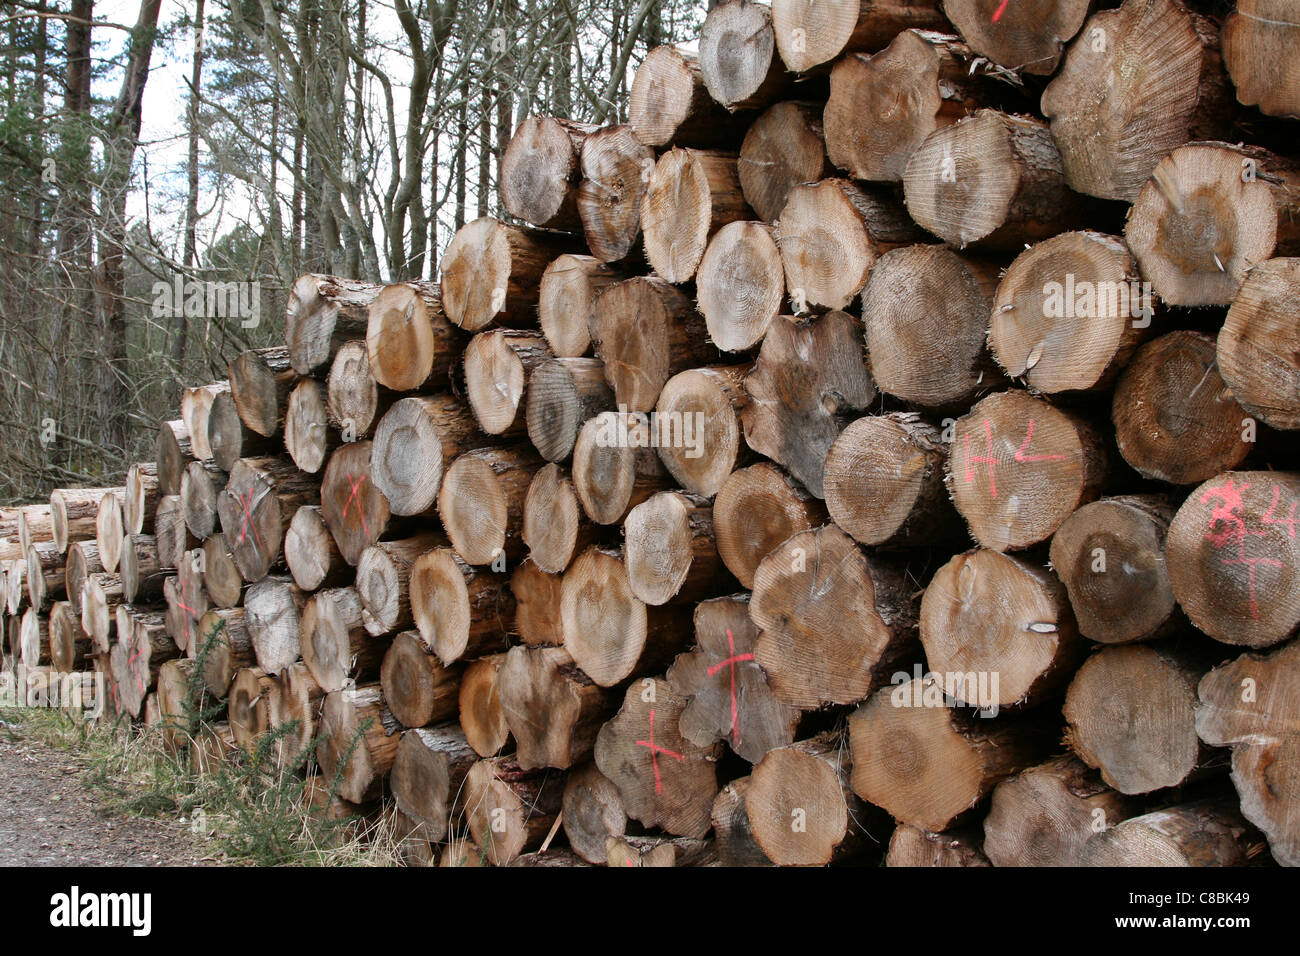 Forest Wood stack, conservation of ancient  forest. Stock Photo